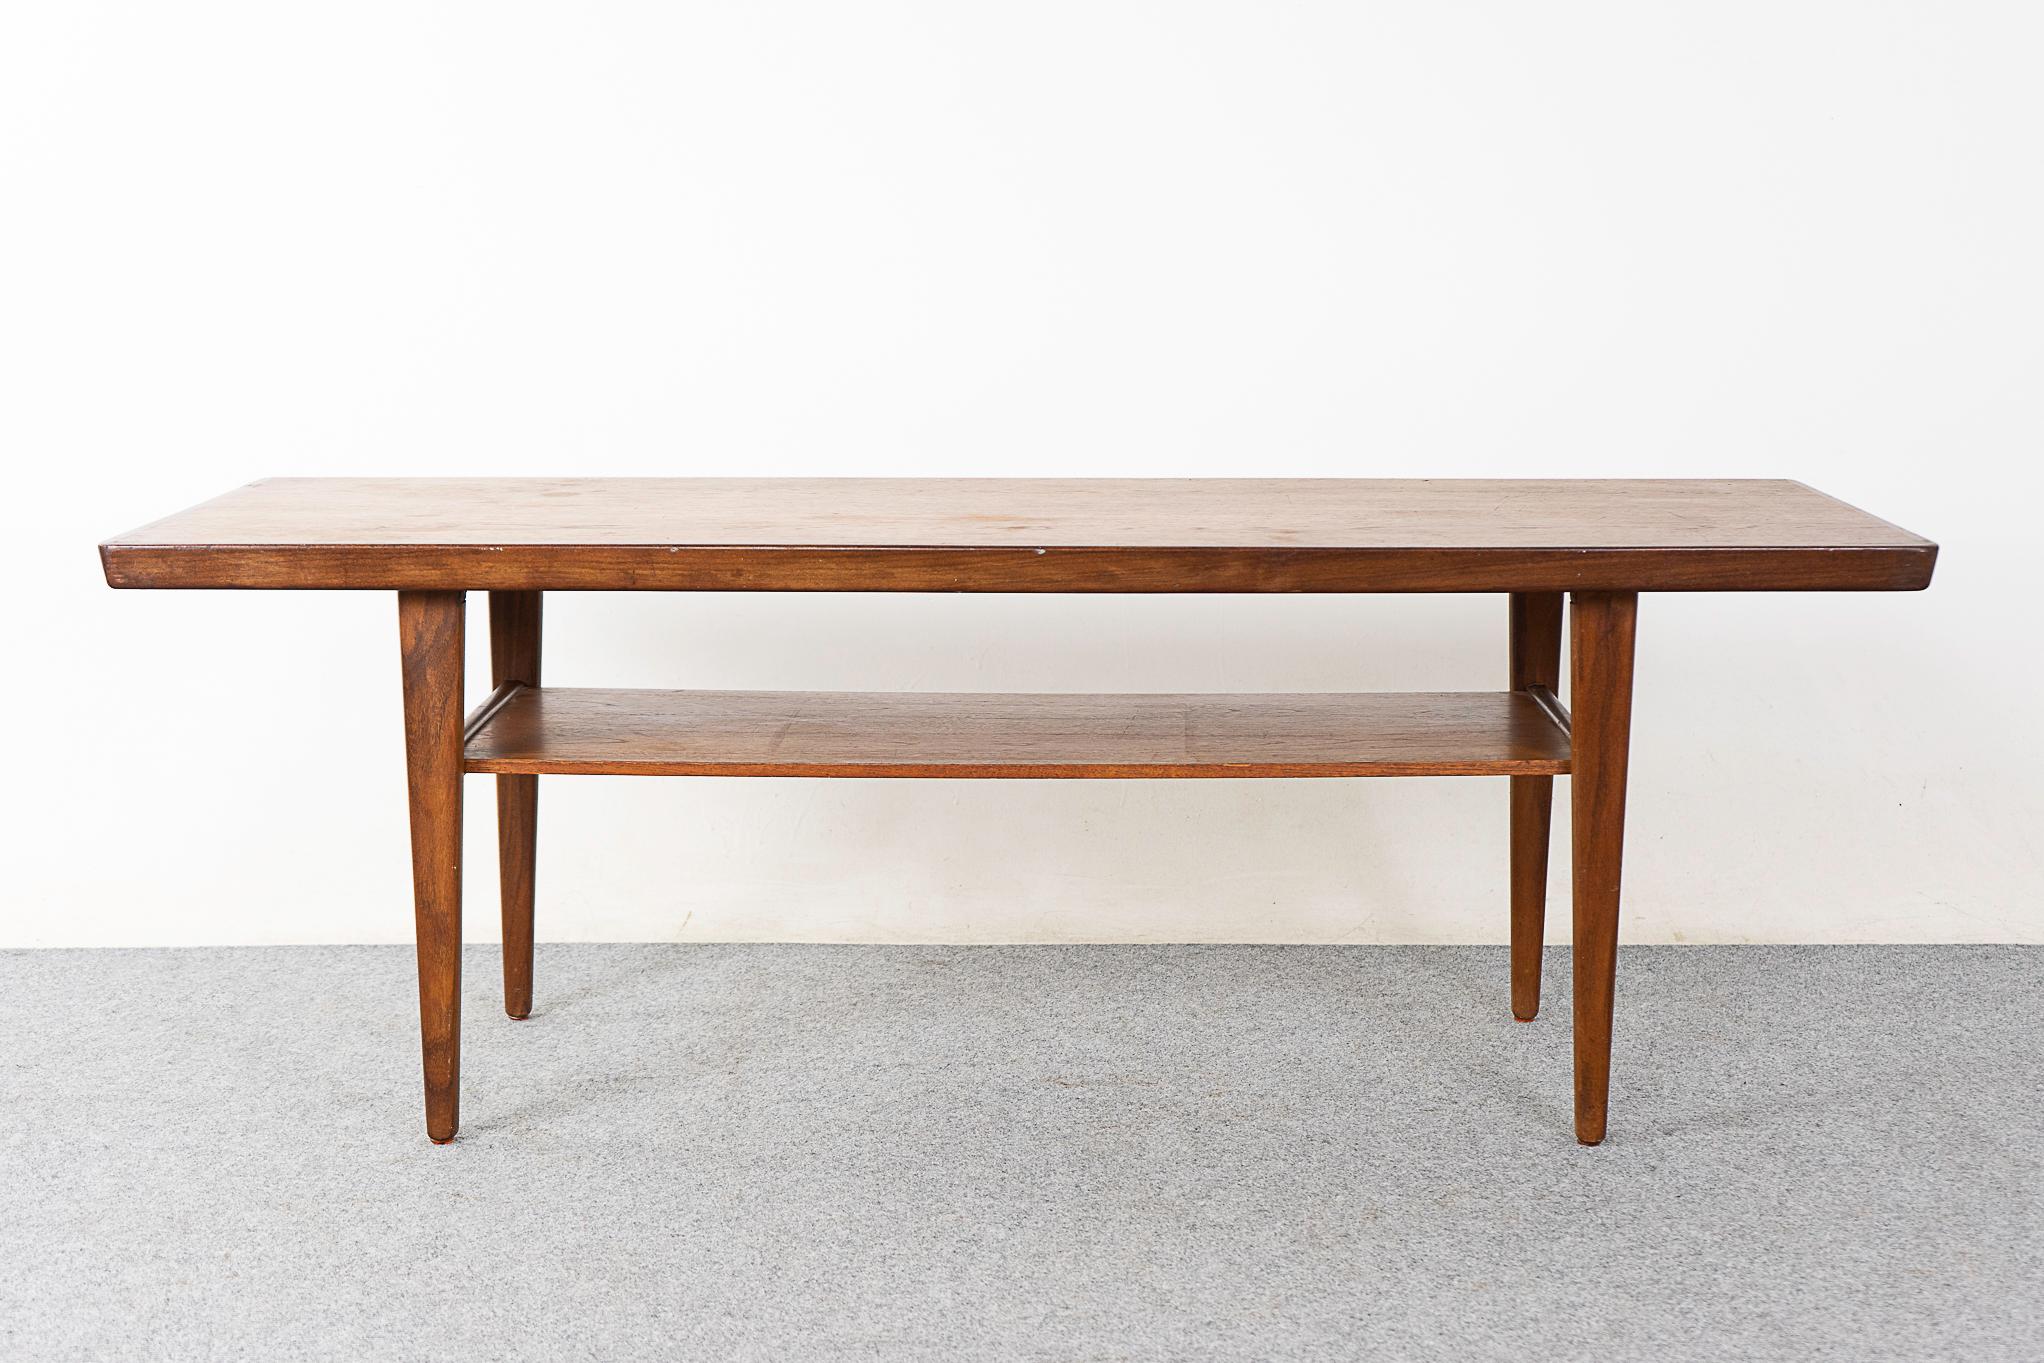 Teak mid-century coffee table, circa 1960's. Top surface has beautiful book matched veneer, angled solid wood edge and elegant legs. Convenient lower shelf, hide away clutter!

Please inquire for remote and international shipping rates.